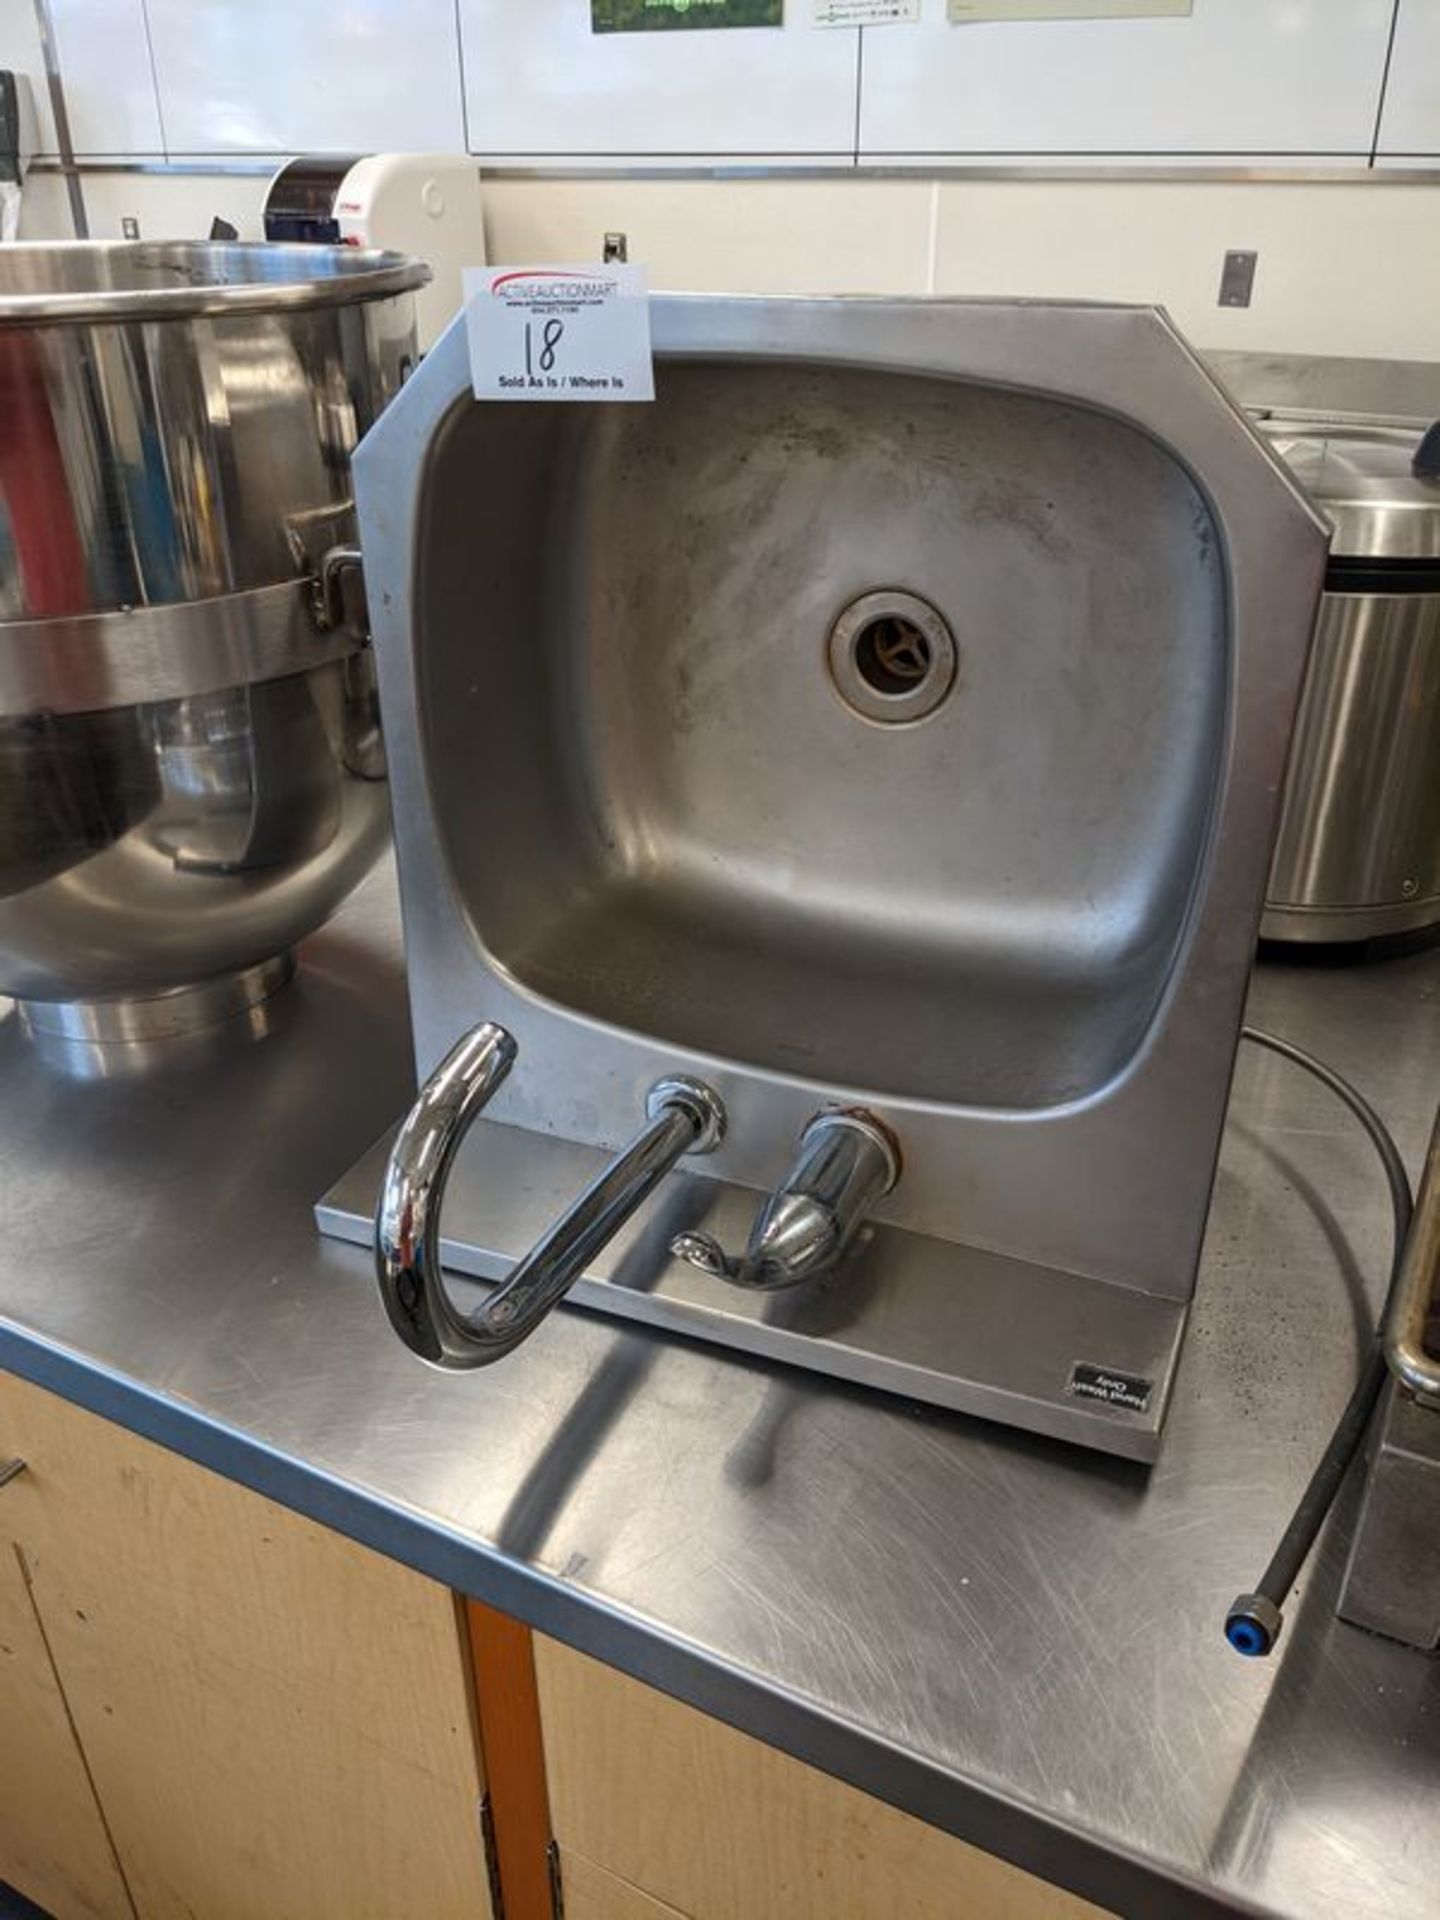 Stainless Steel Wall mount Hand Sink